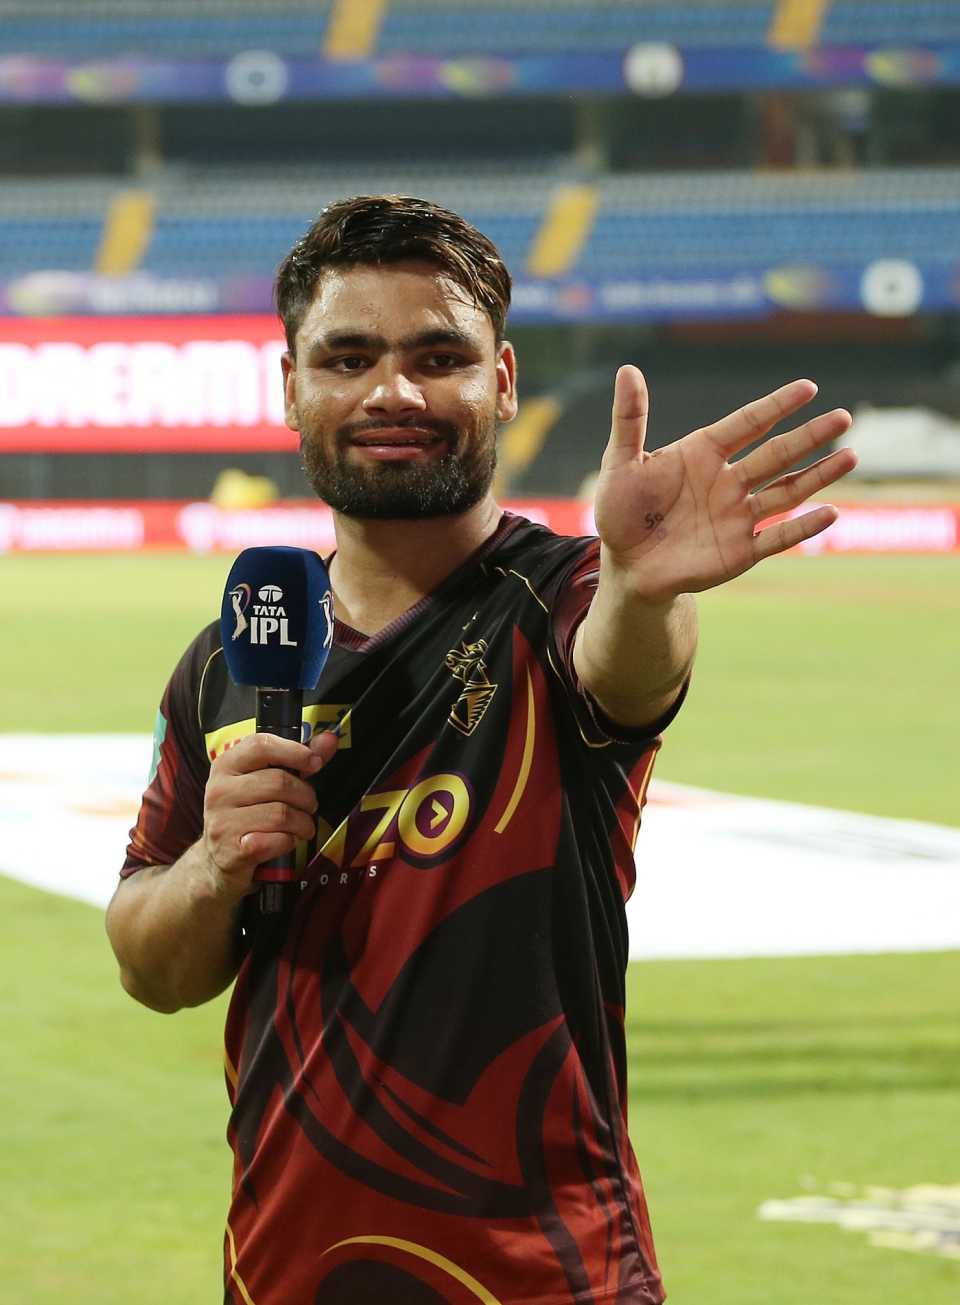 Rinku Singh at the post-match show after his unbeaten innings took KKR home, Kolkata Knight Riders vs Rajasthan Royals, IPL 2022, Wankhede Stadium, May 2, 2022